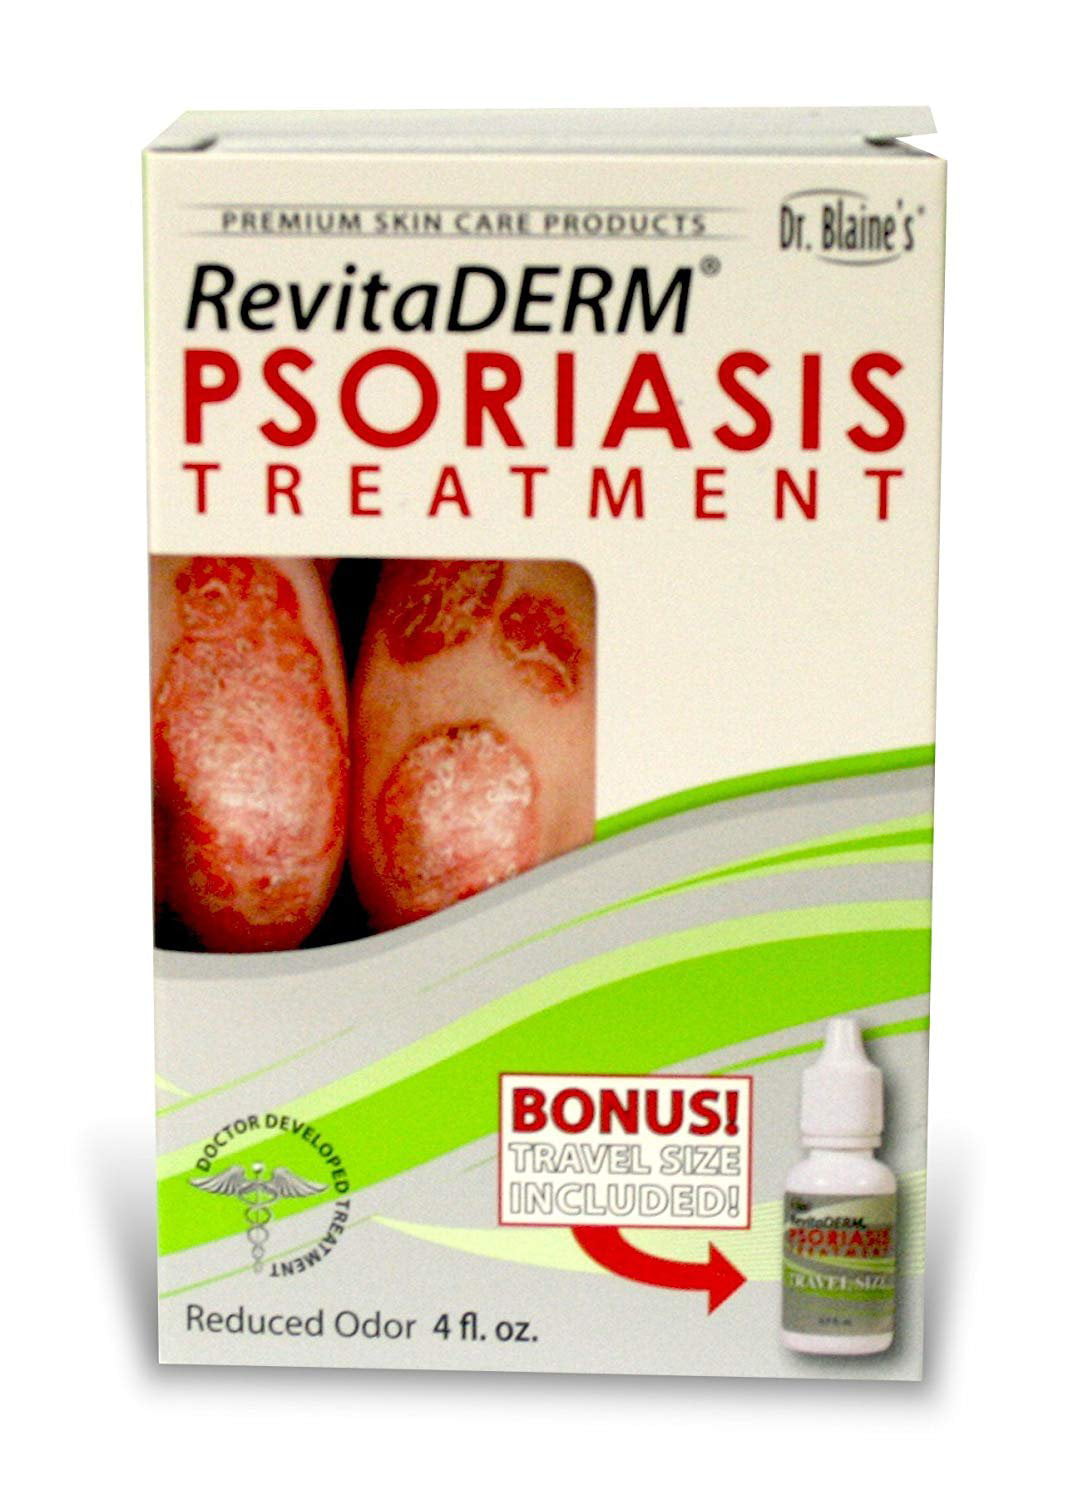 over the counter psoriasis treatment at walmart)